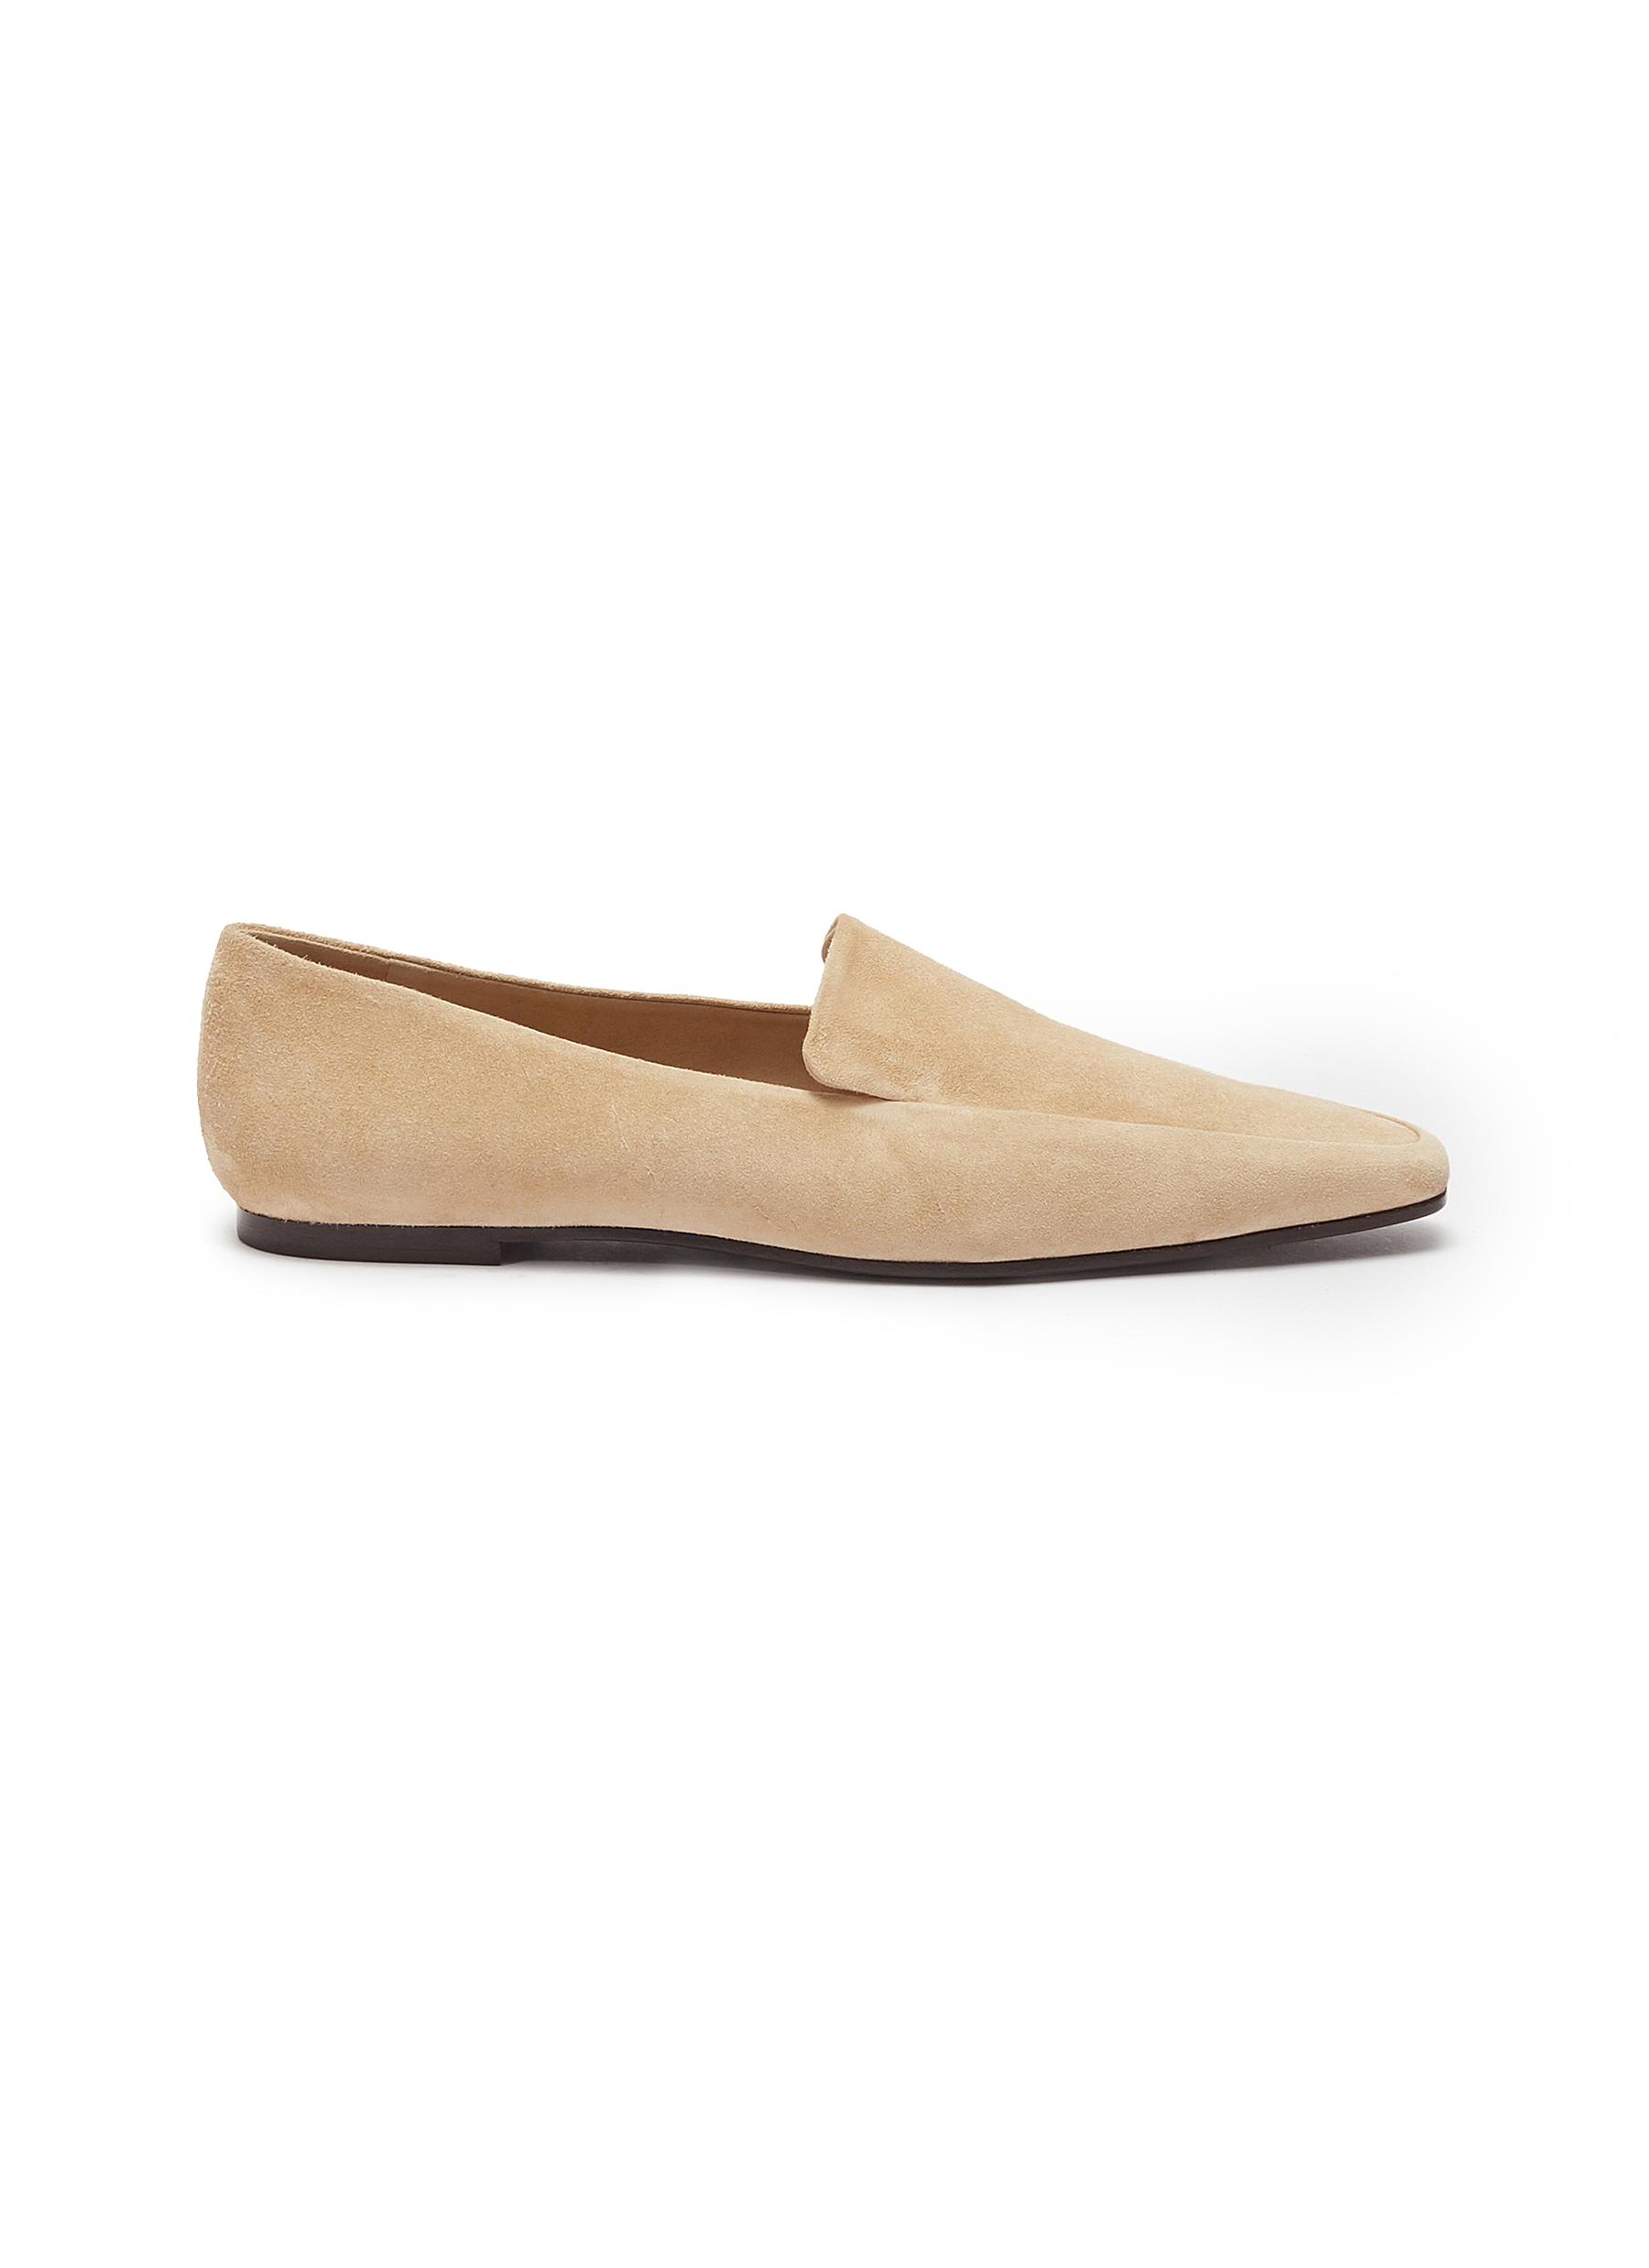 Minimal suede loafers by The Row